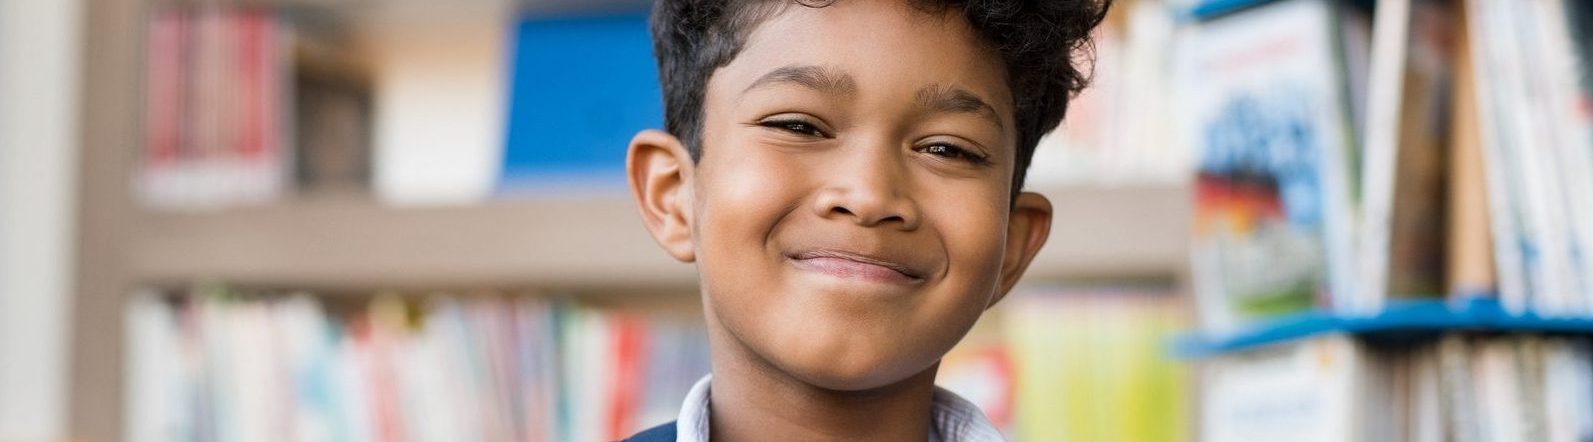 smiling Latino or Middle Eastern young boy in front of books